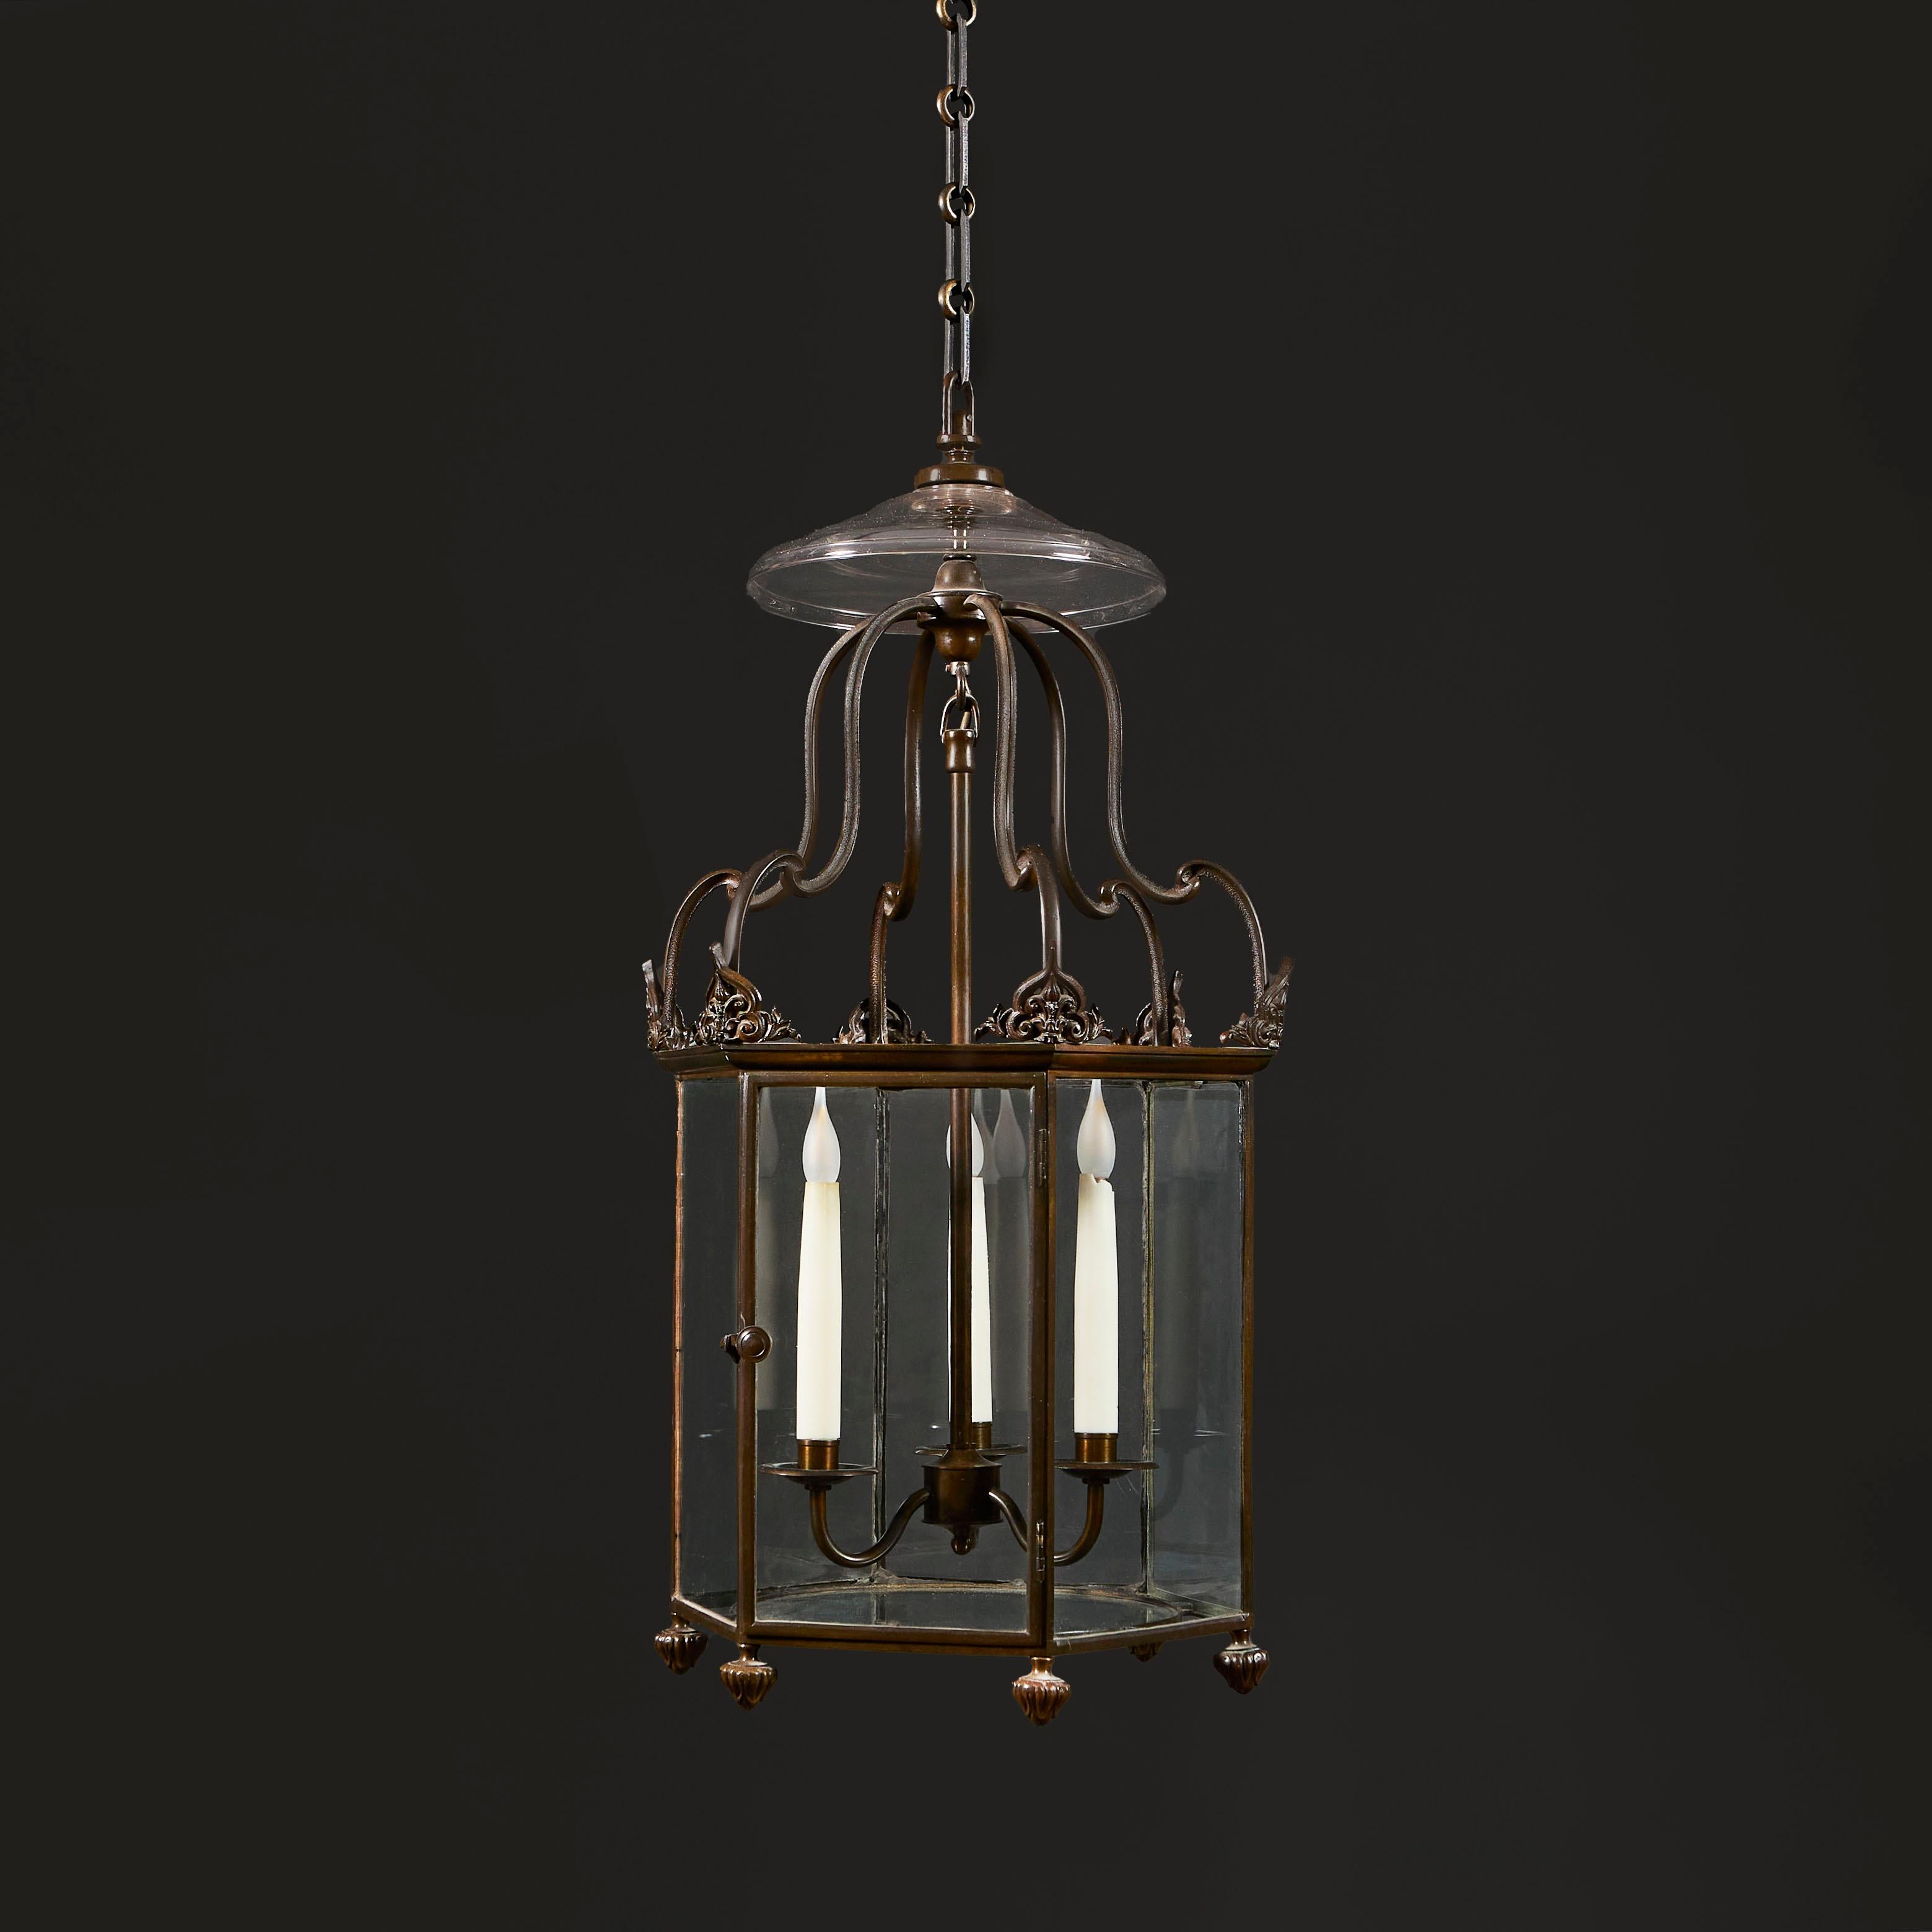 England, circa 1840

A fine early nineteenth century hexagonal bronze hall lantern with stylised anthemions to the canted corners, shaped uprights below a glass cowl, all supported on turned feet decorated in foliate design. One foot of chain